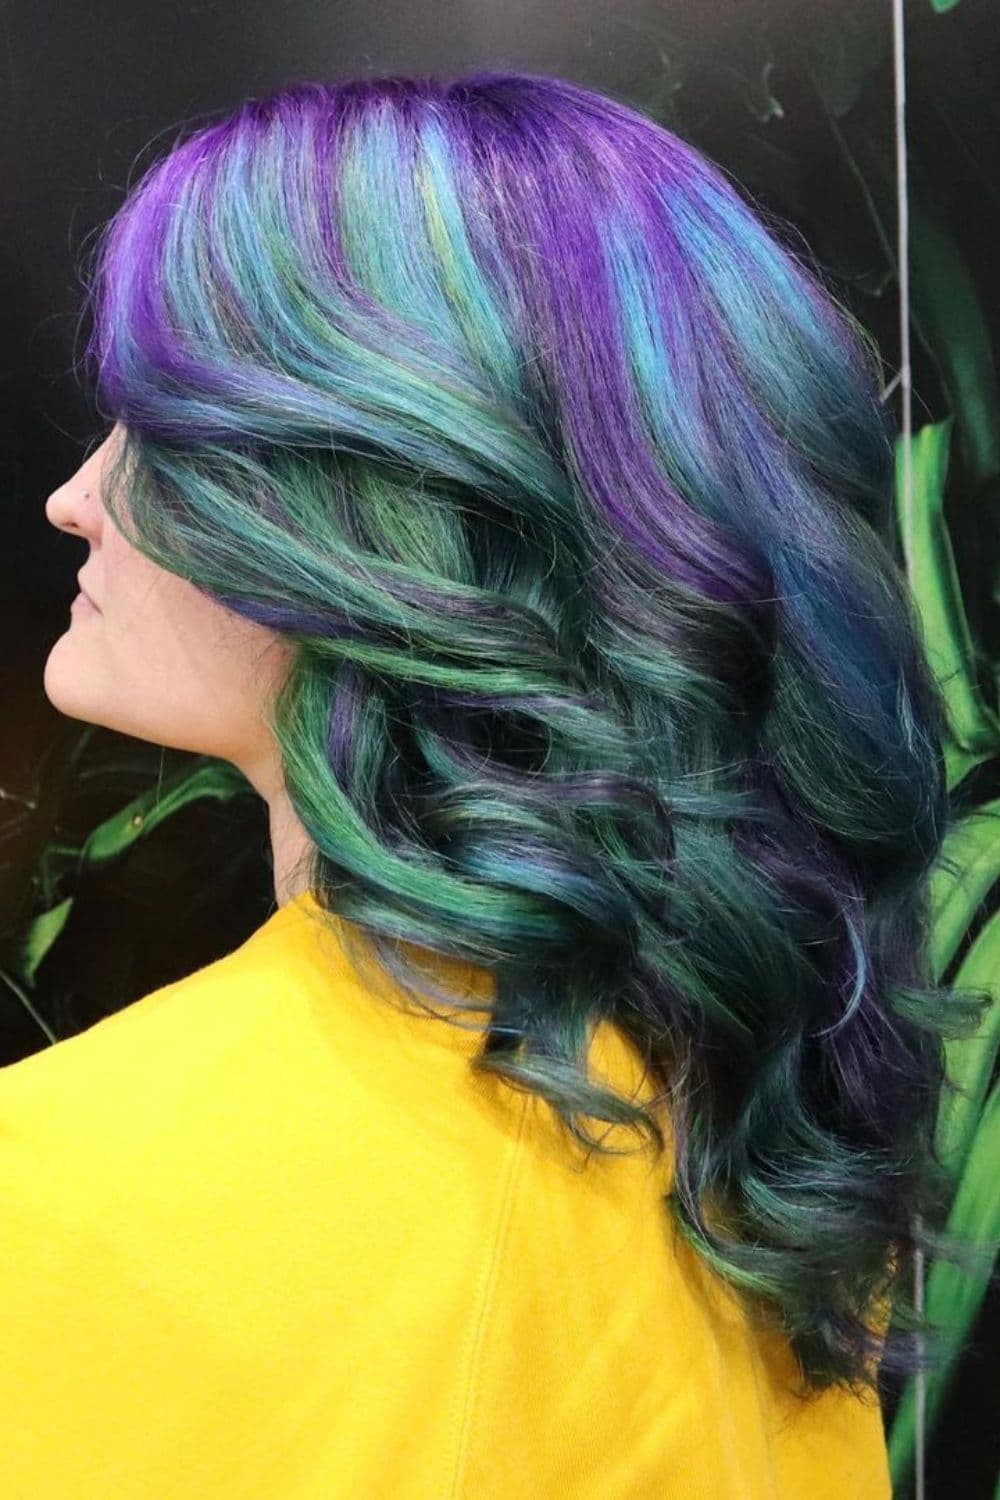 A woman with blue, green and purple hair with big curls.